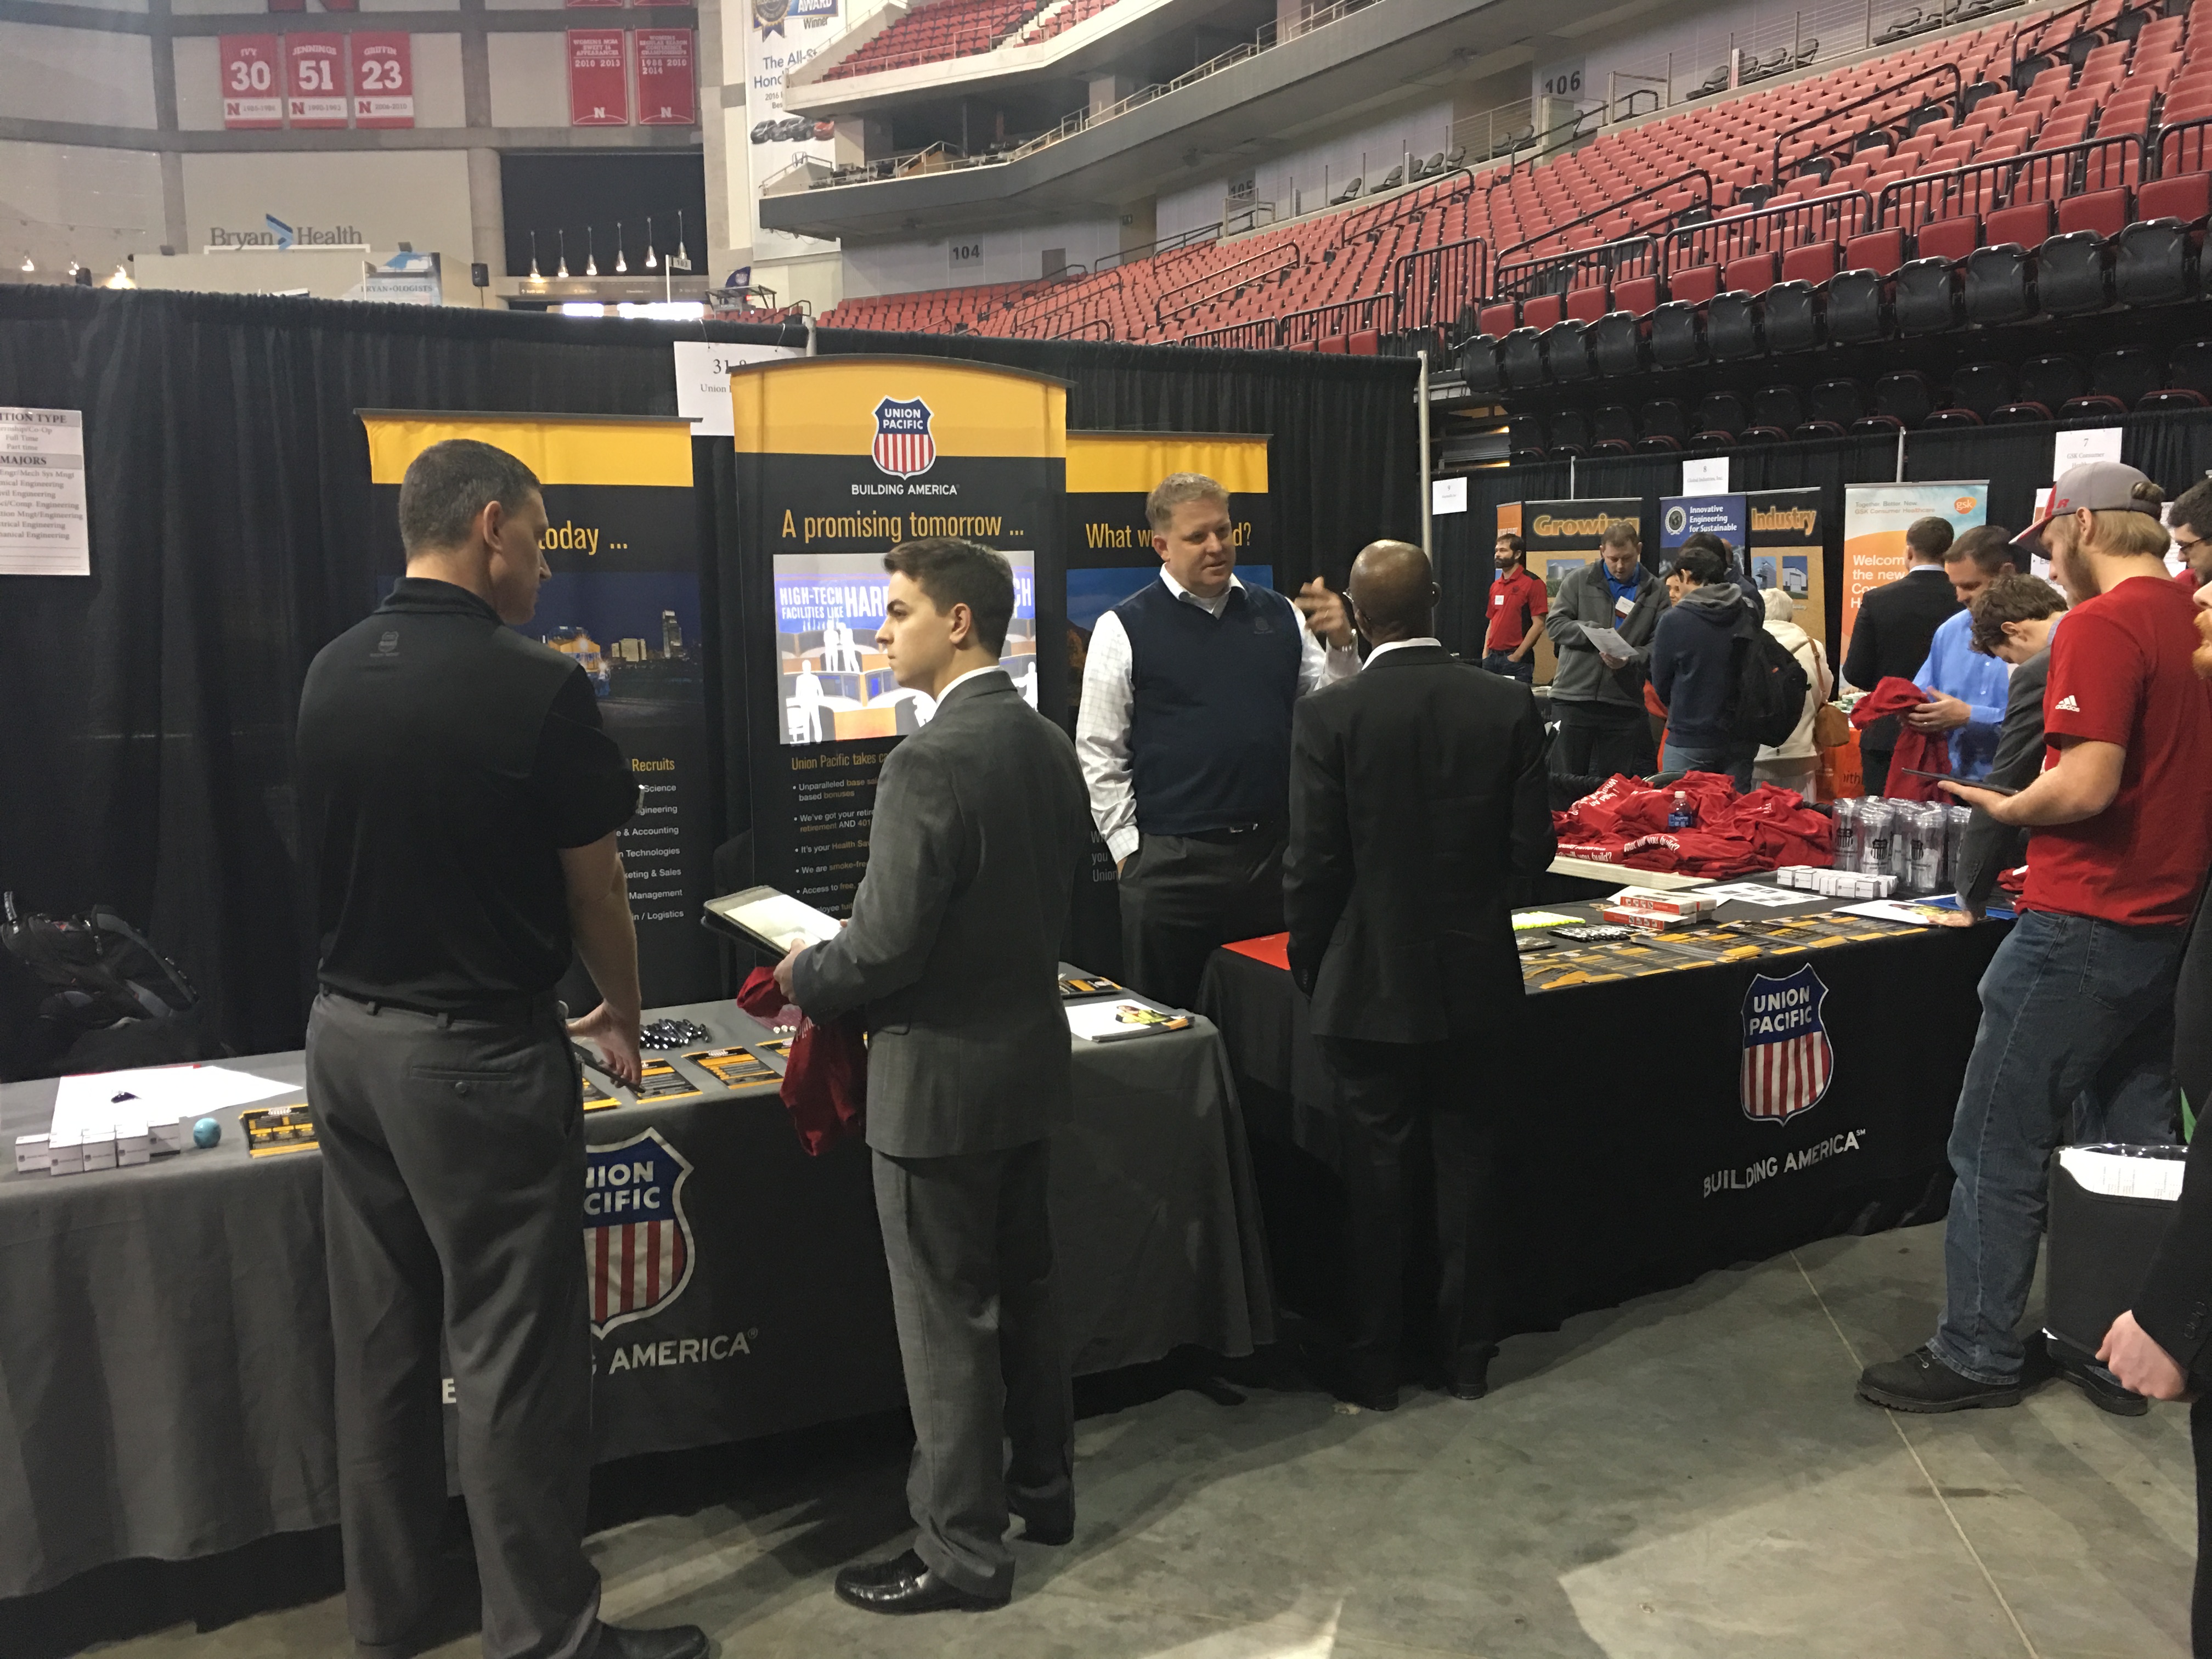 Come to Pinnacle Bank Arena on Tuesday for the fall STEM Career Fair and meet with representatives from employers and other organizations about job and internship possibilities.